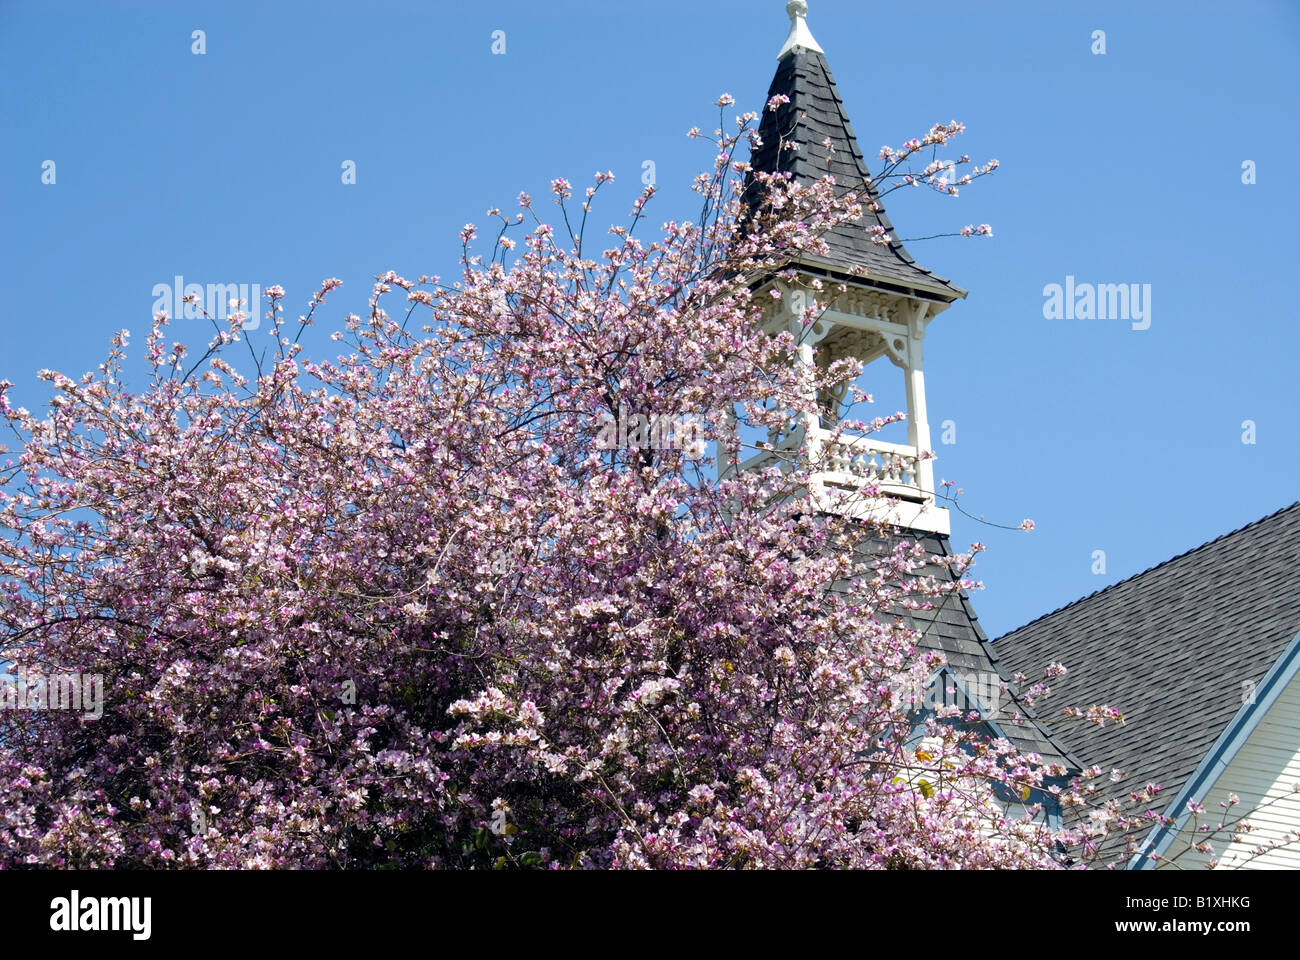 Springtime photo of a tree with pink flowers on it, right next to a chapel's steeple. Stock Photo